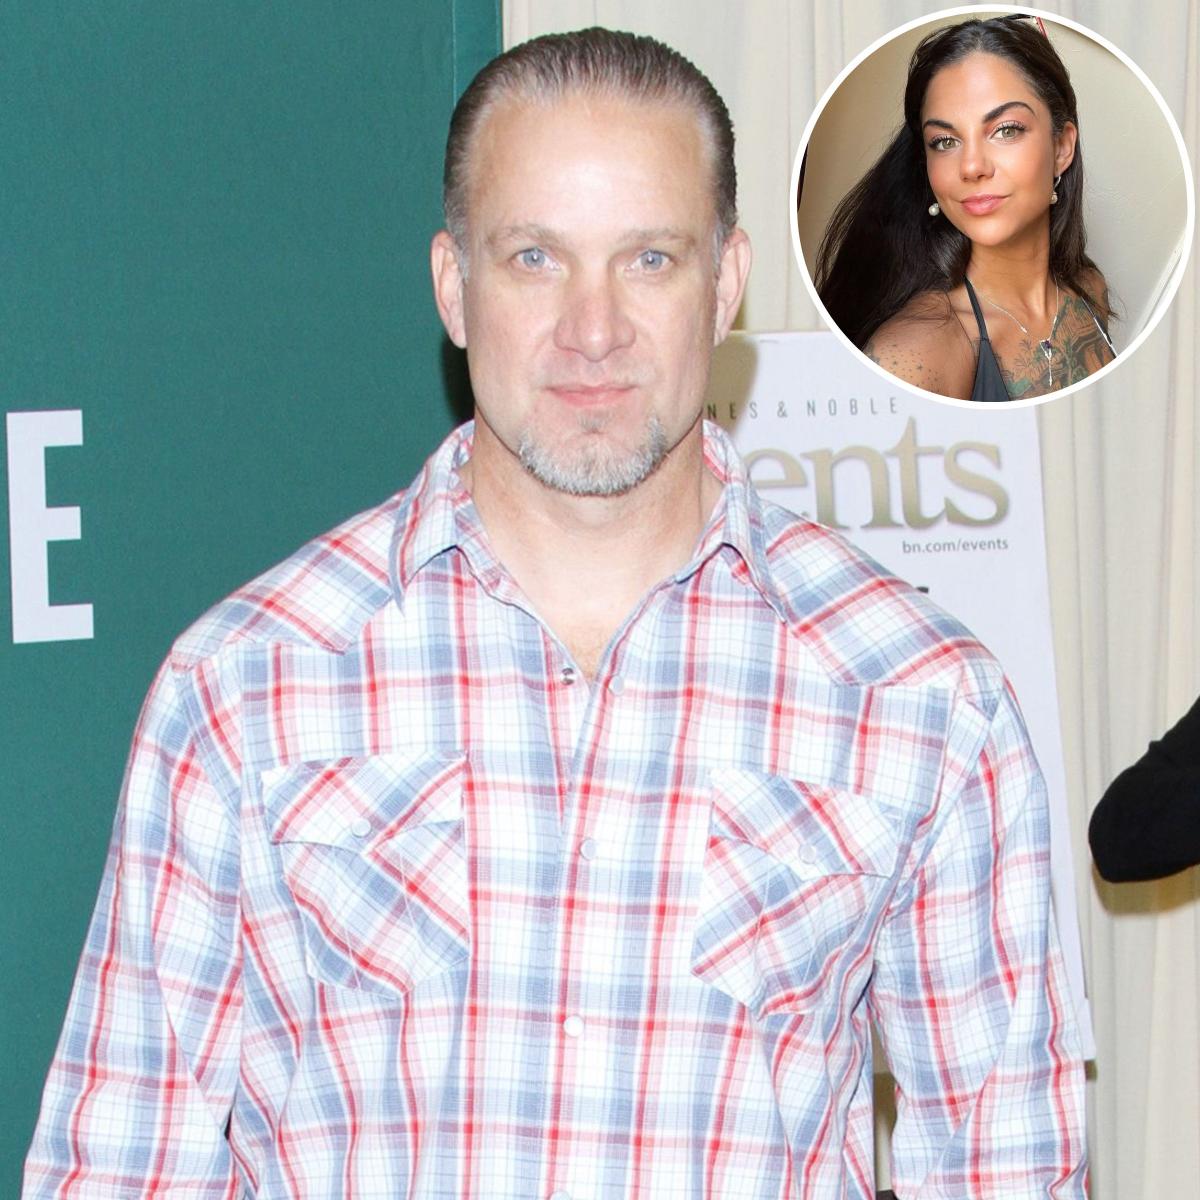 Jesse James Pregnant Wife Bonnie Rotten Accuses Him of Cheating Her Statement, His Response, More